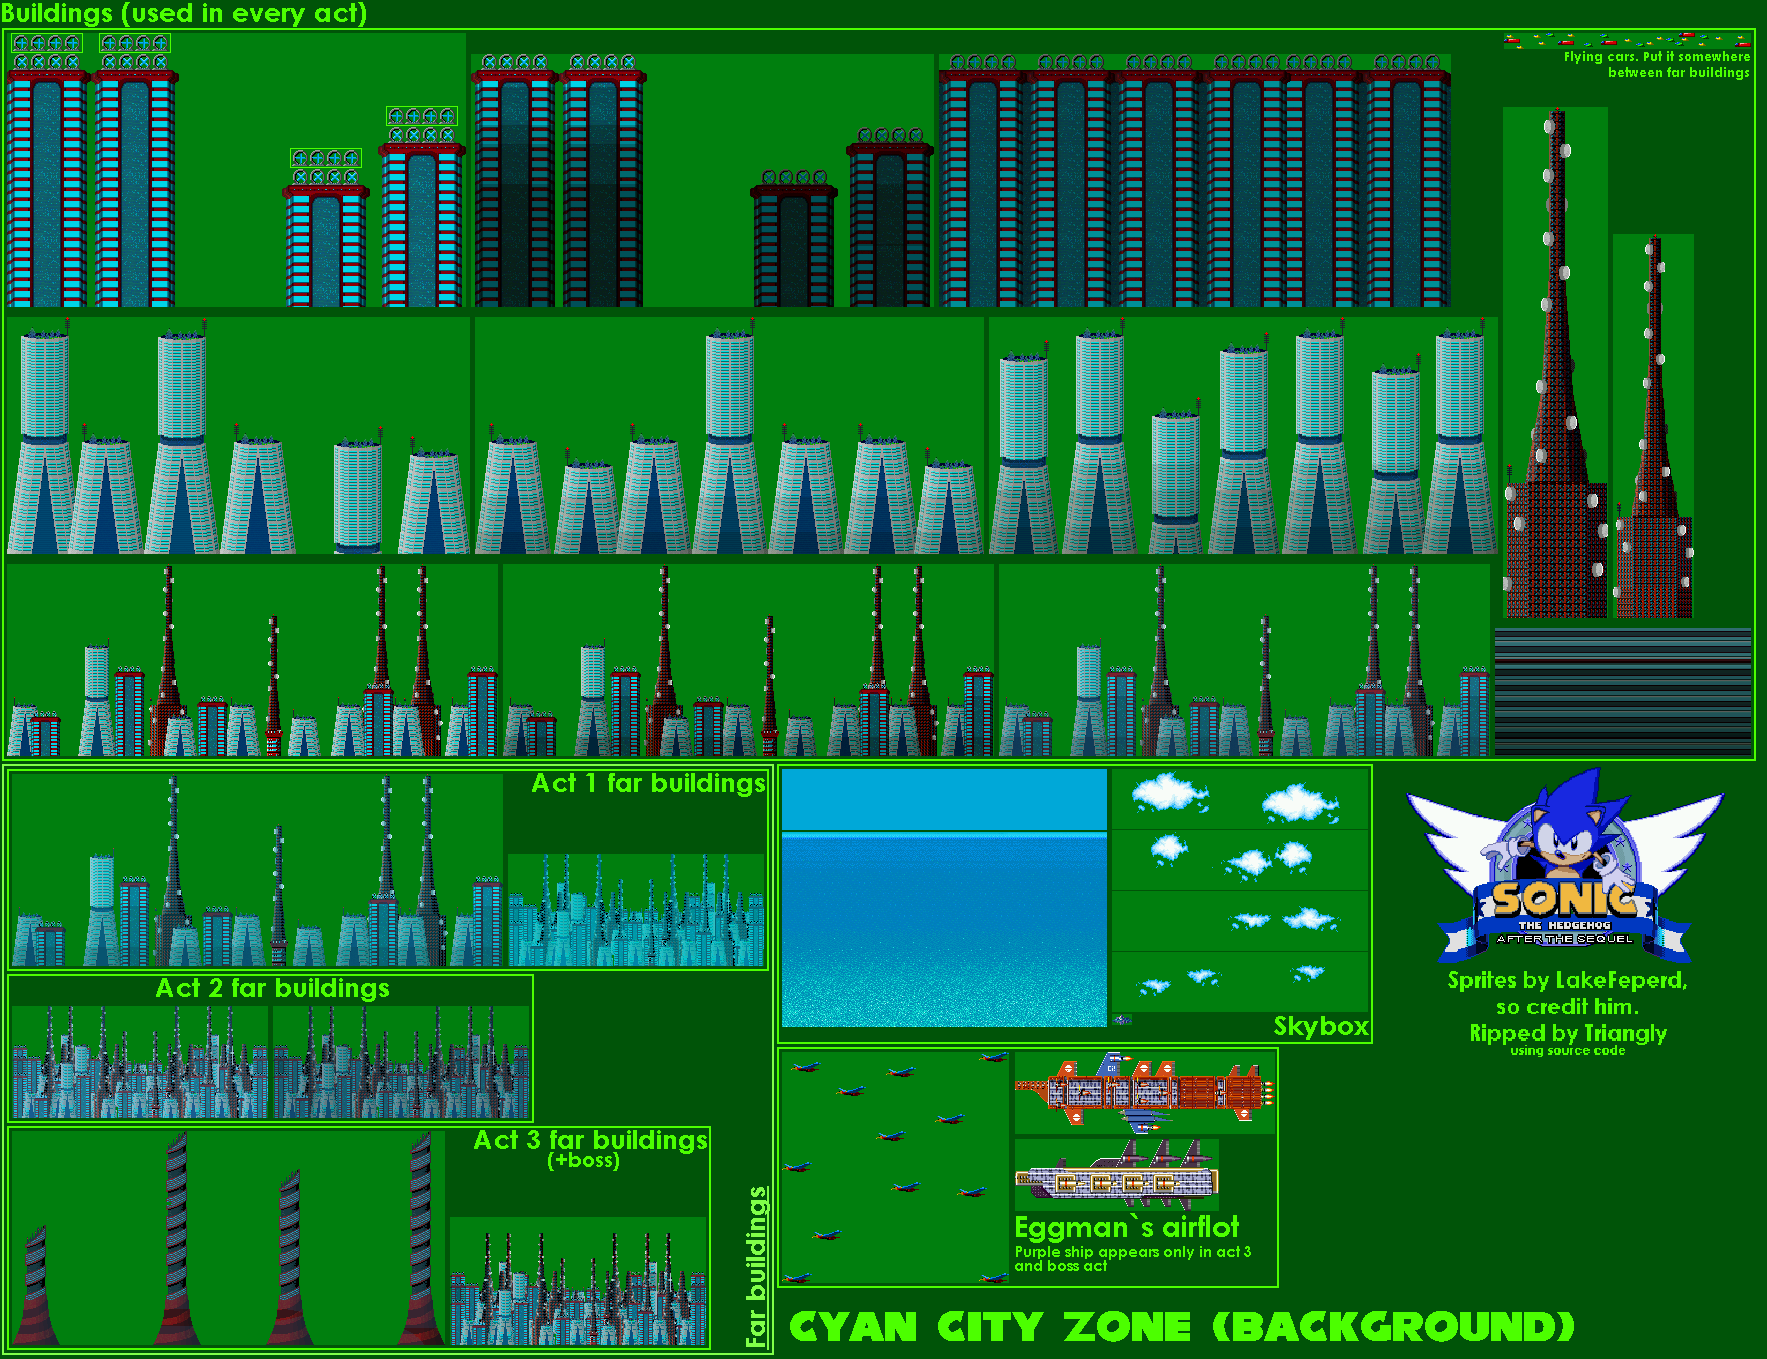 Sonic After the Sequel - Cyan City Zone